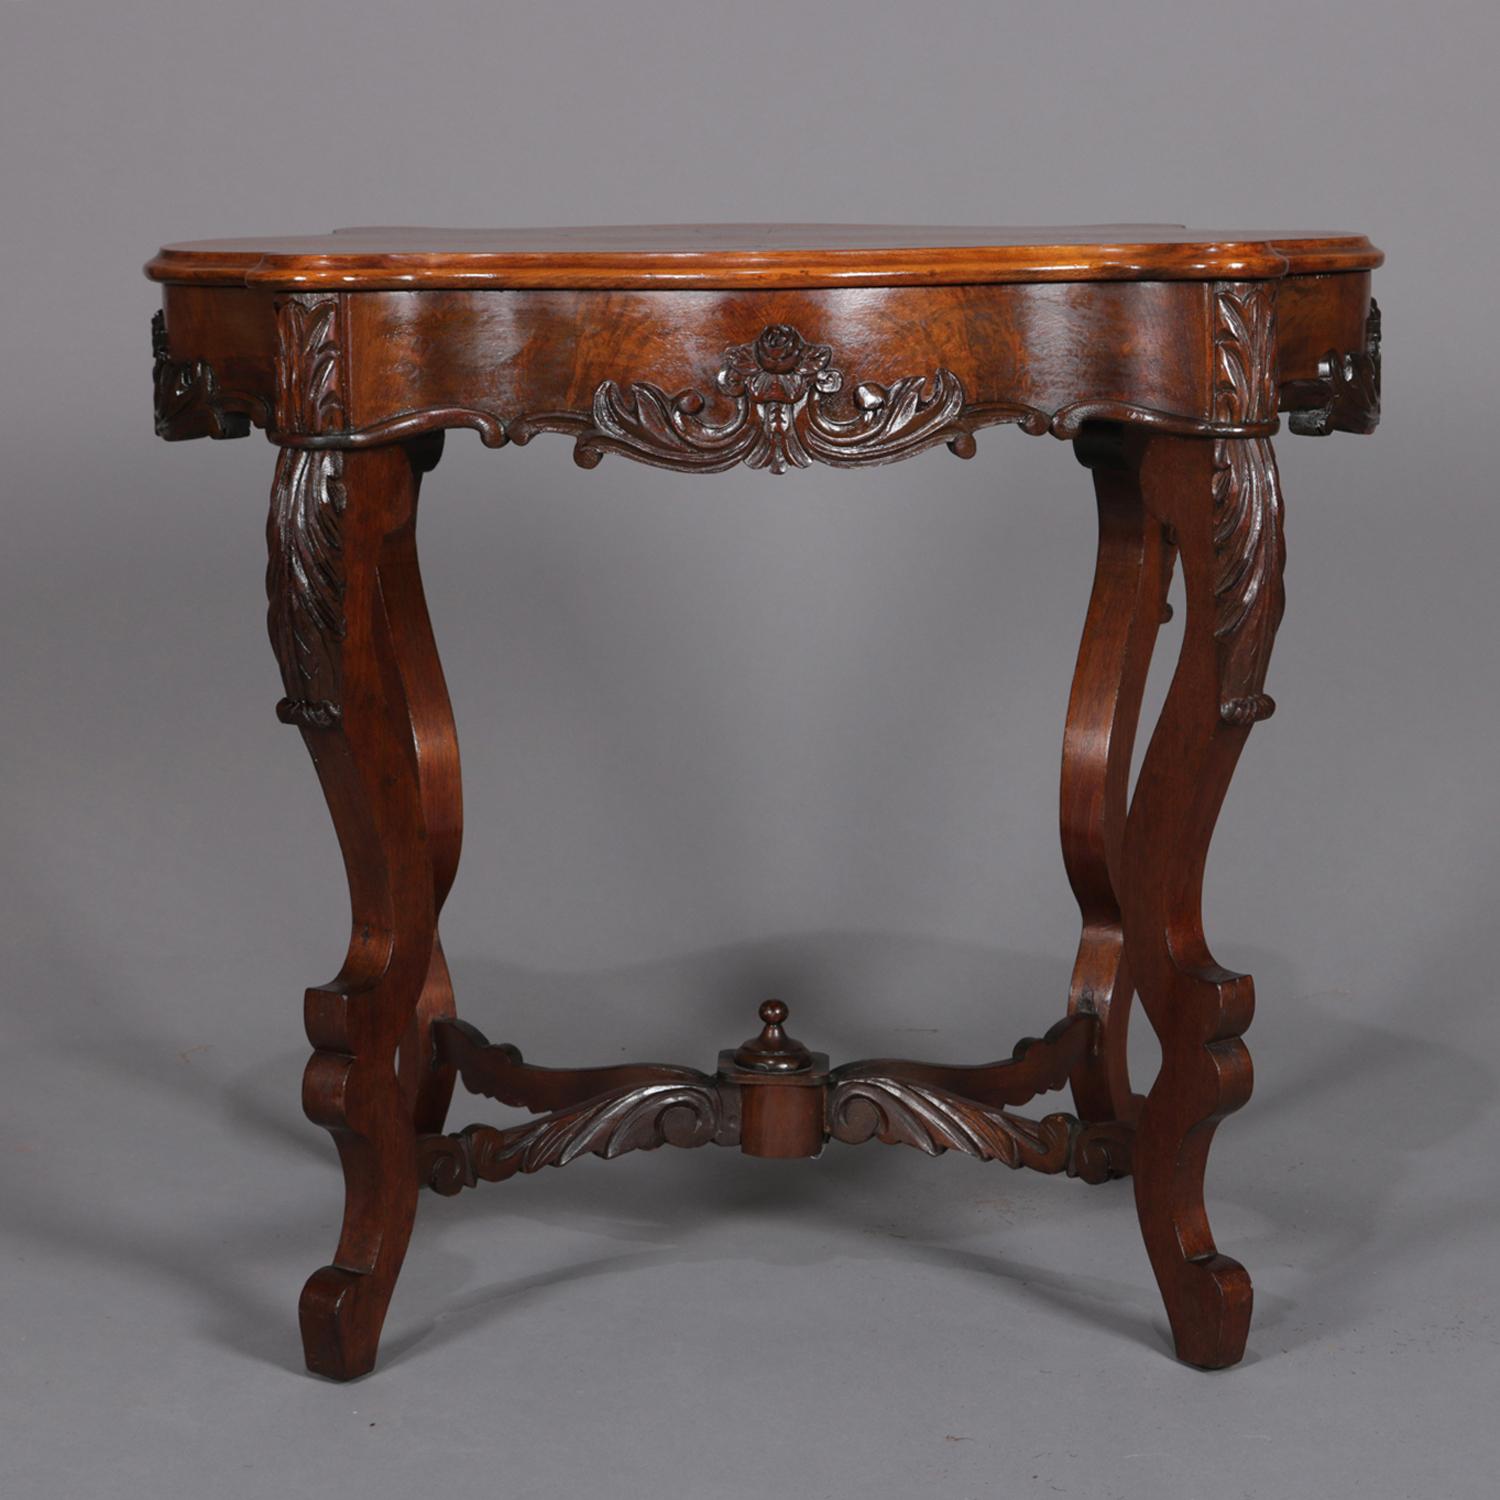 19th Century Antique Foliate and Floral Carved Walnut Center Table, circa 1890